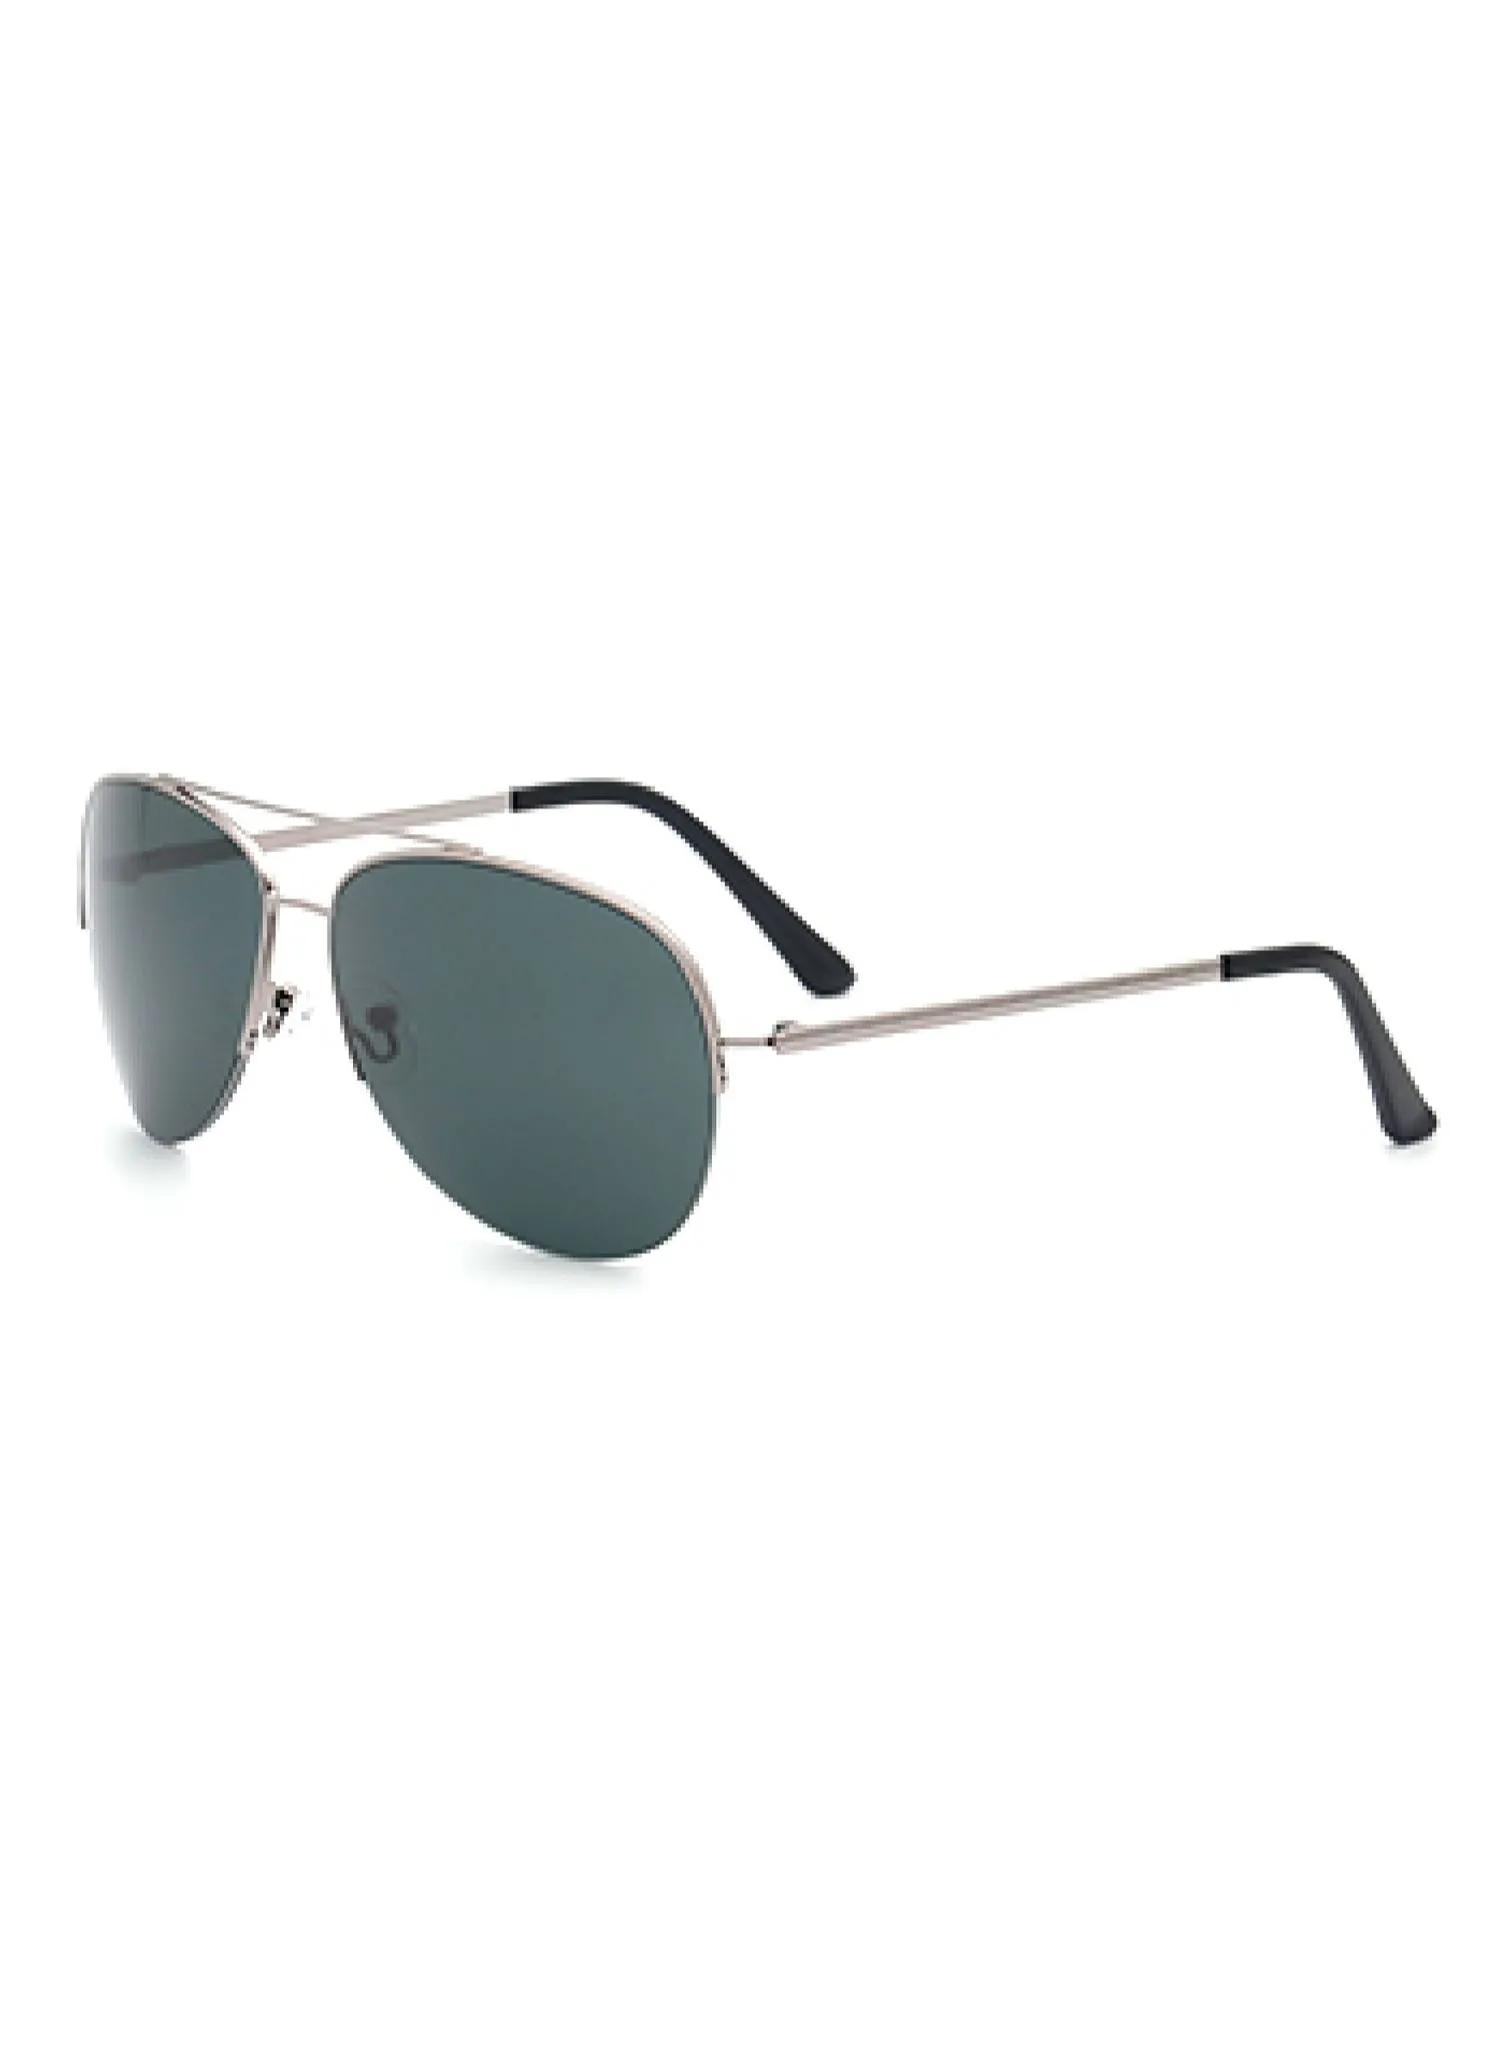 LAOONT Attractive Aviator Sunglasses With Polarized Lenses